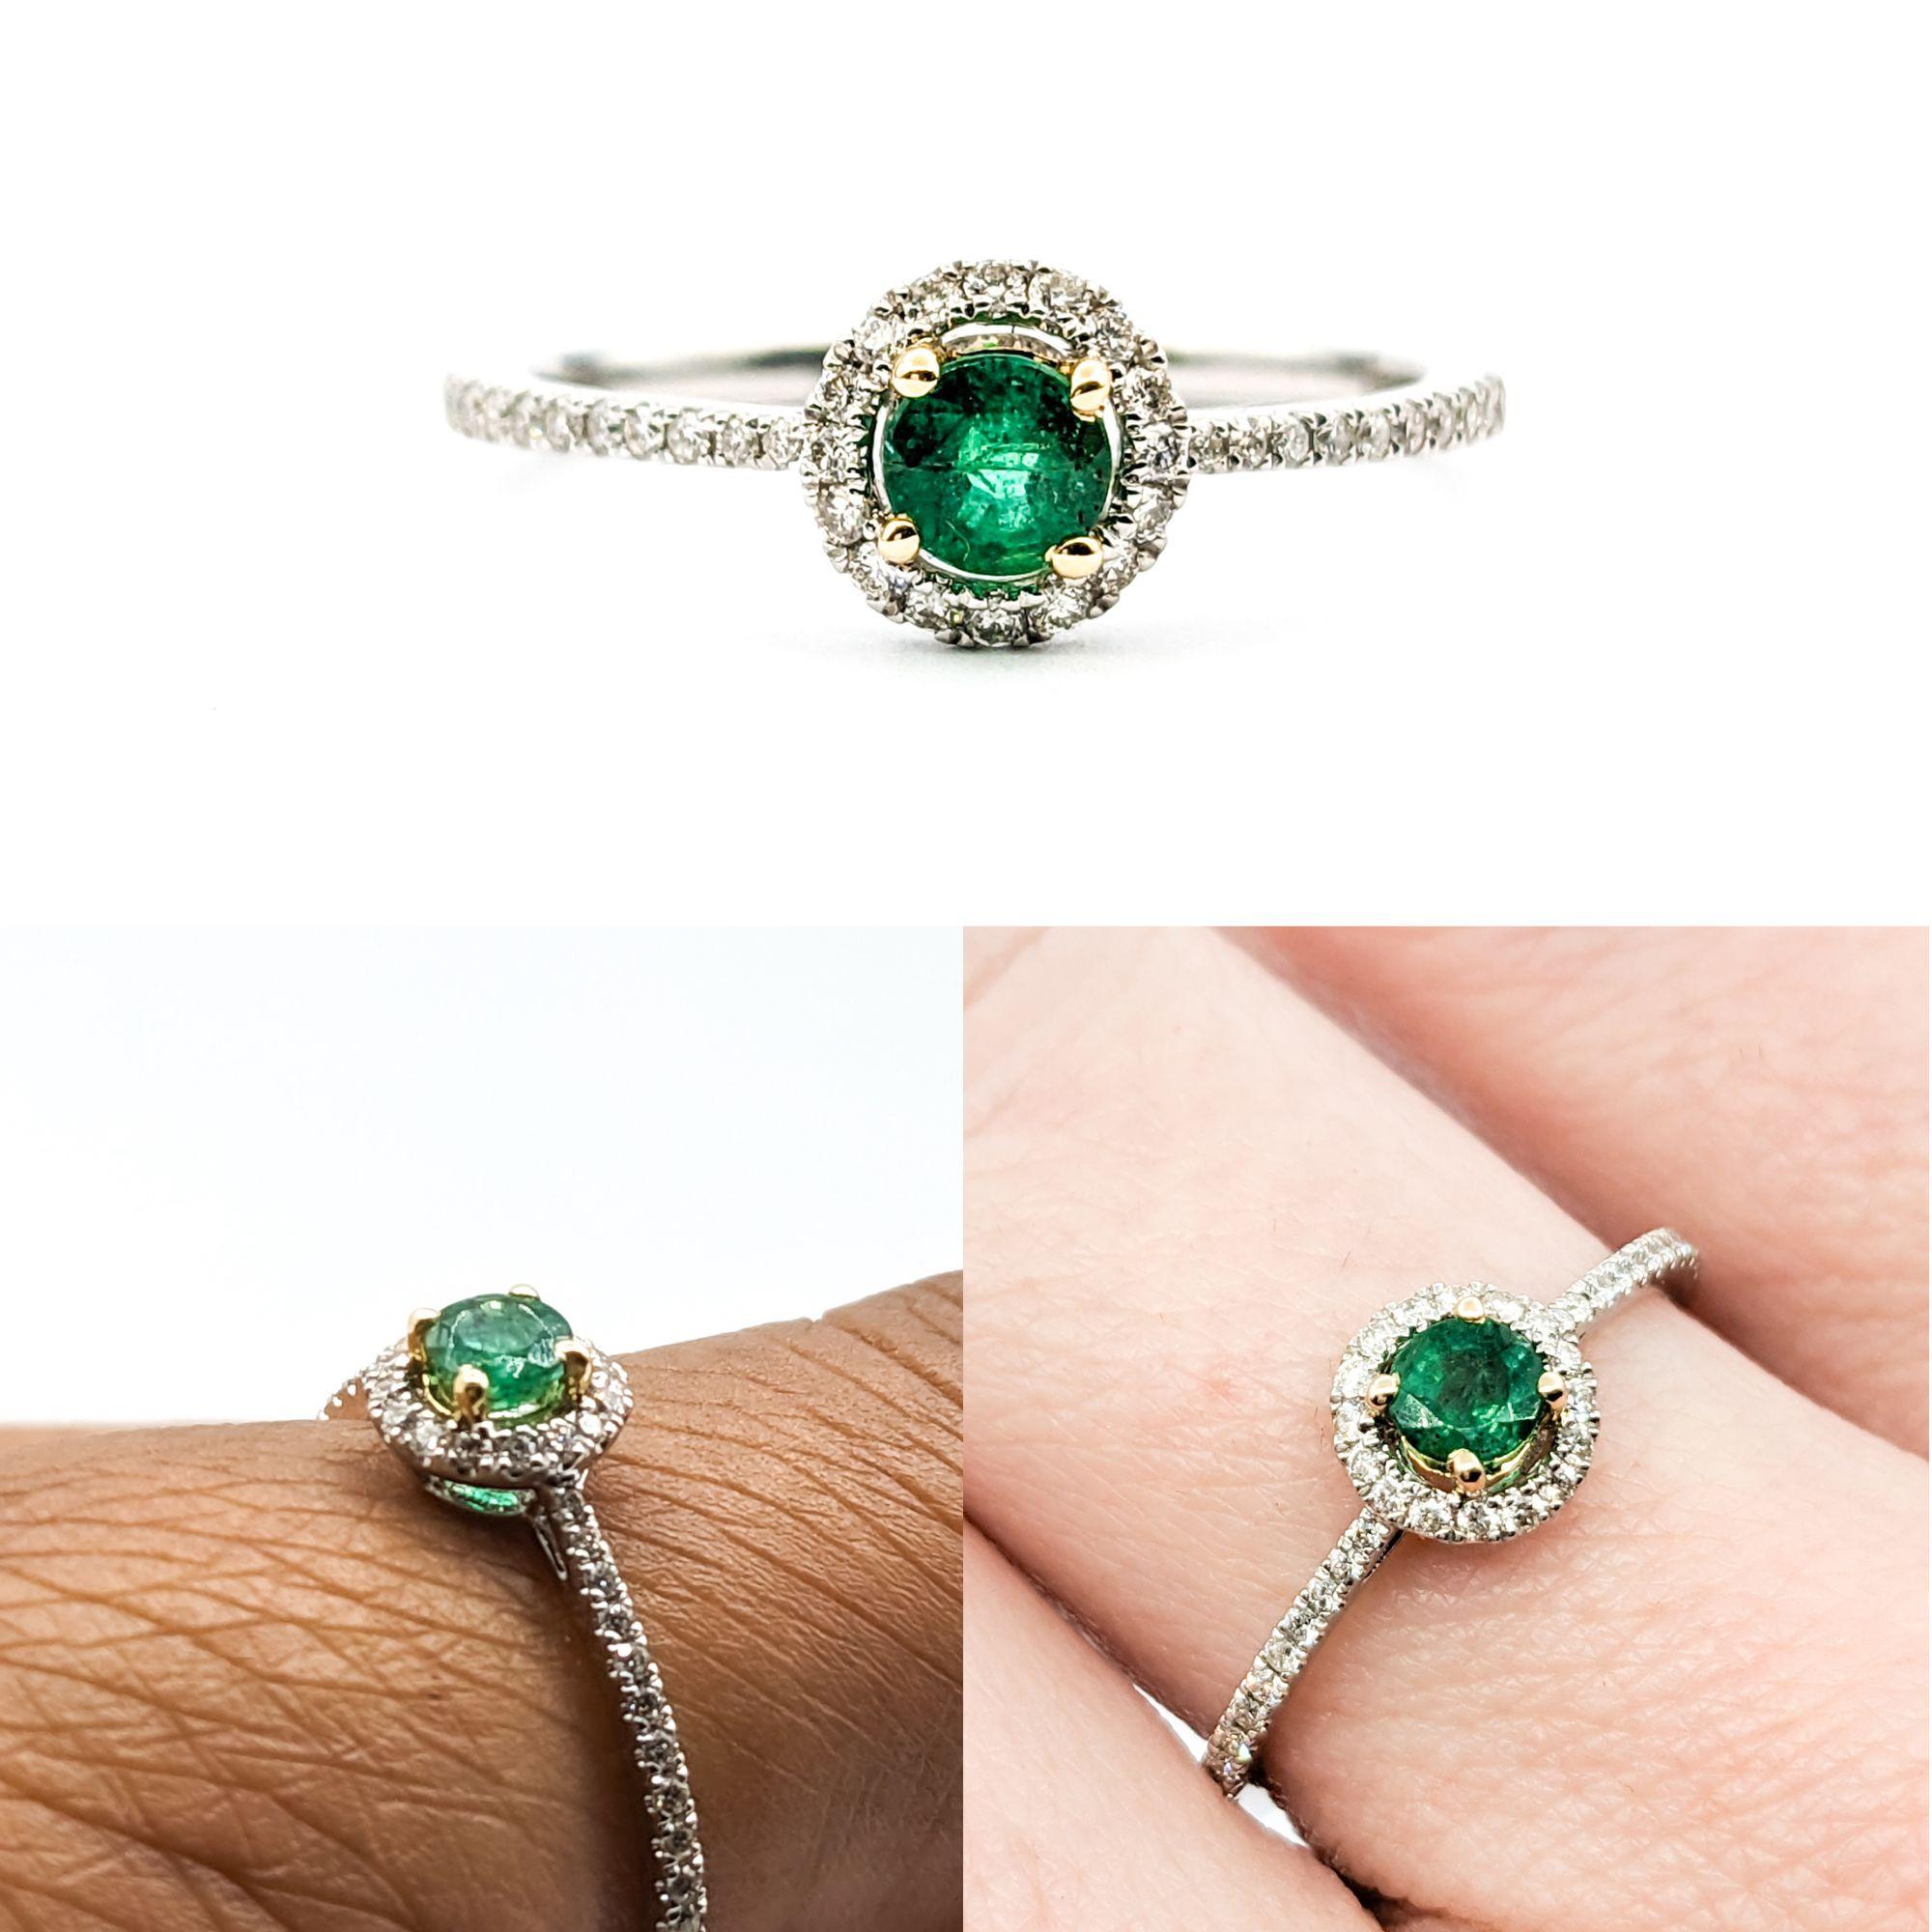 Emerald & Diamond Ring In Platinum

This exquisite emerald ring, masterfully crafted in 950 Platinum. This Ring boasts a halo of .18ctw diamonds that sparkle with SI-I clarity and a near colorless hue surrounding a stunning .22ct natural emerald